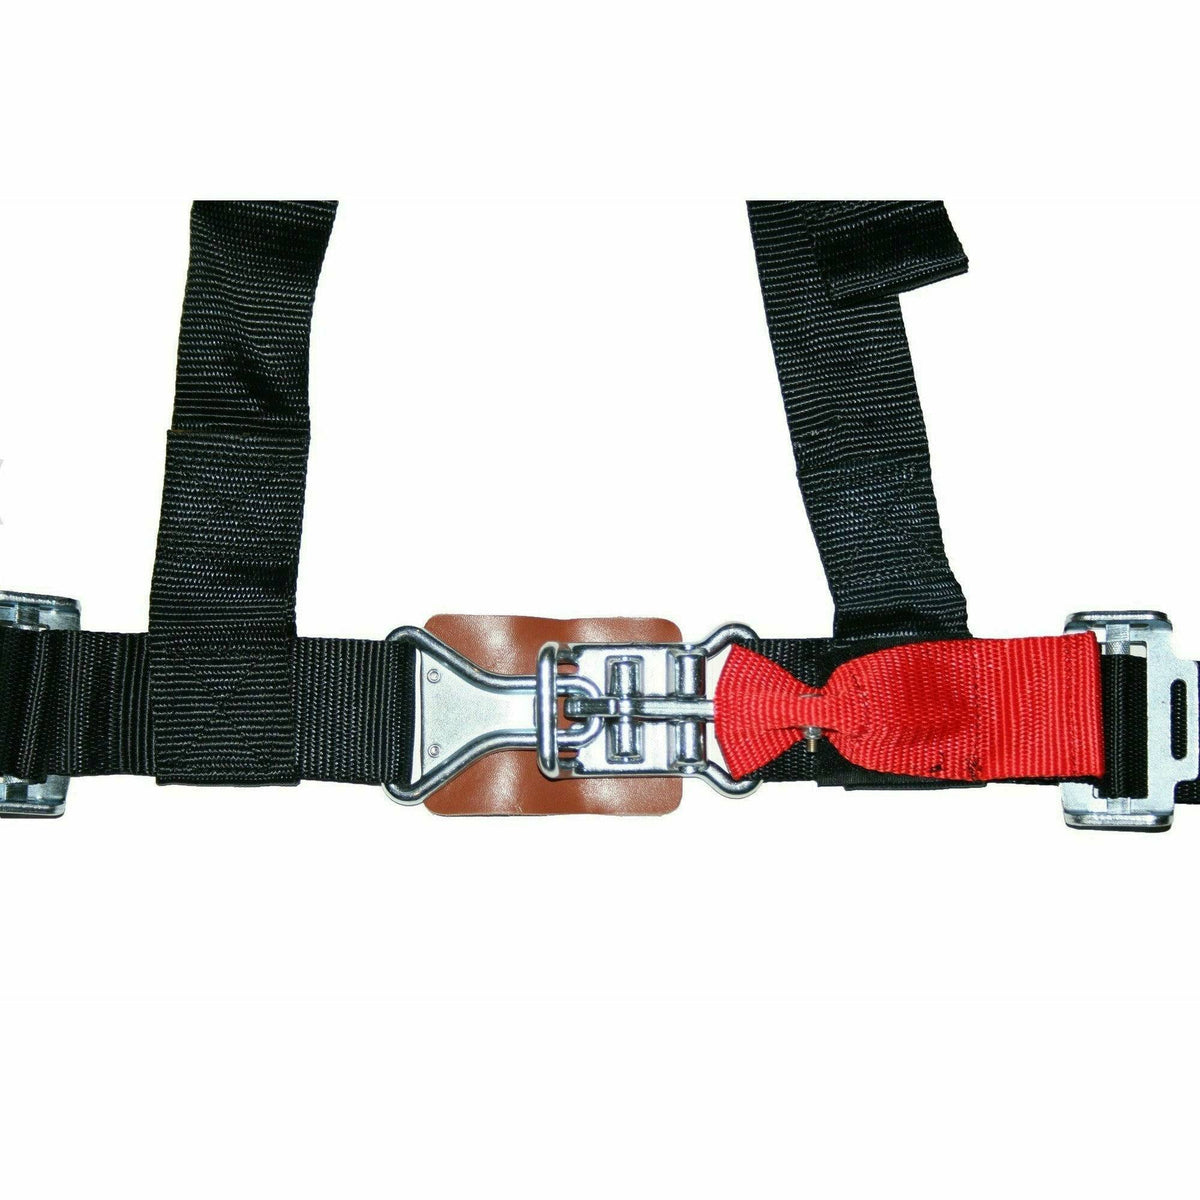 UTV Mountain Accessories 2" 4 Point Harness Off Road Buckle